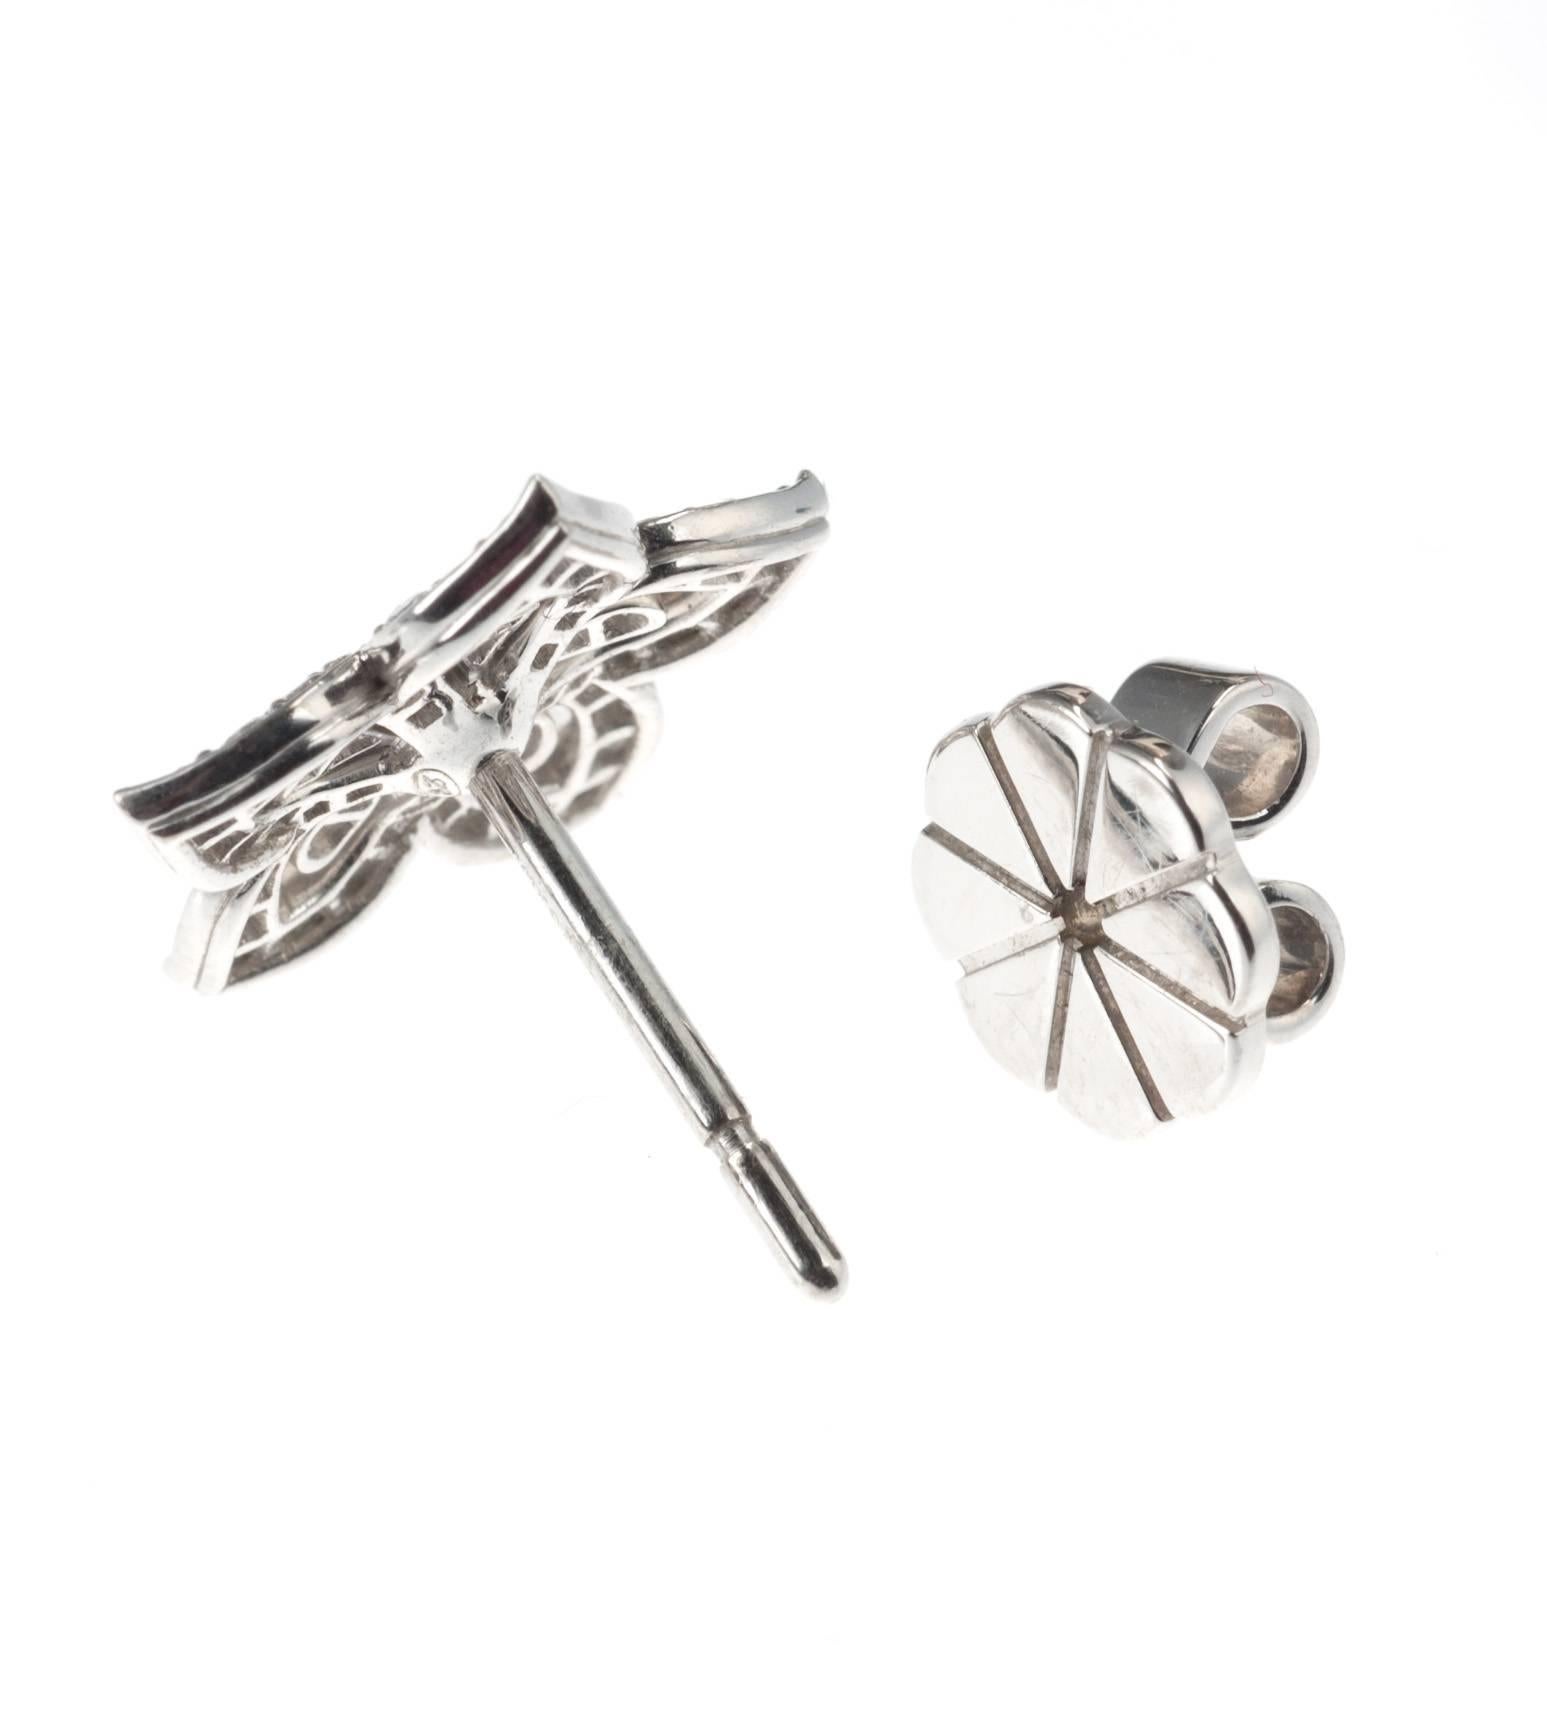 Delicate 18-karat white gold flower stud earrings by British designer Lucie Campbell sparkle with feminine allure. Set with 108 brilliant-cut round diamonds, .70ctw. Secured with clutch backs on posts. 